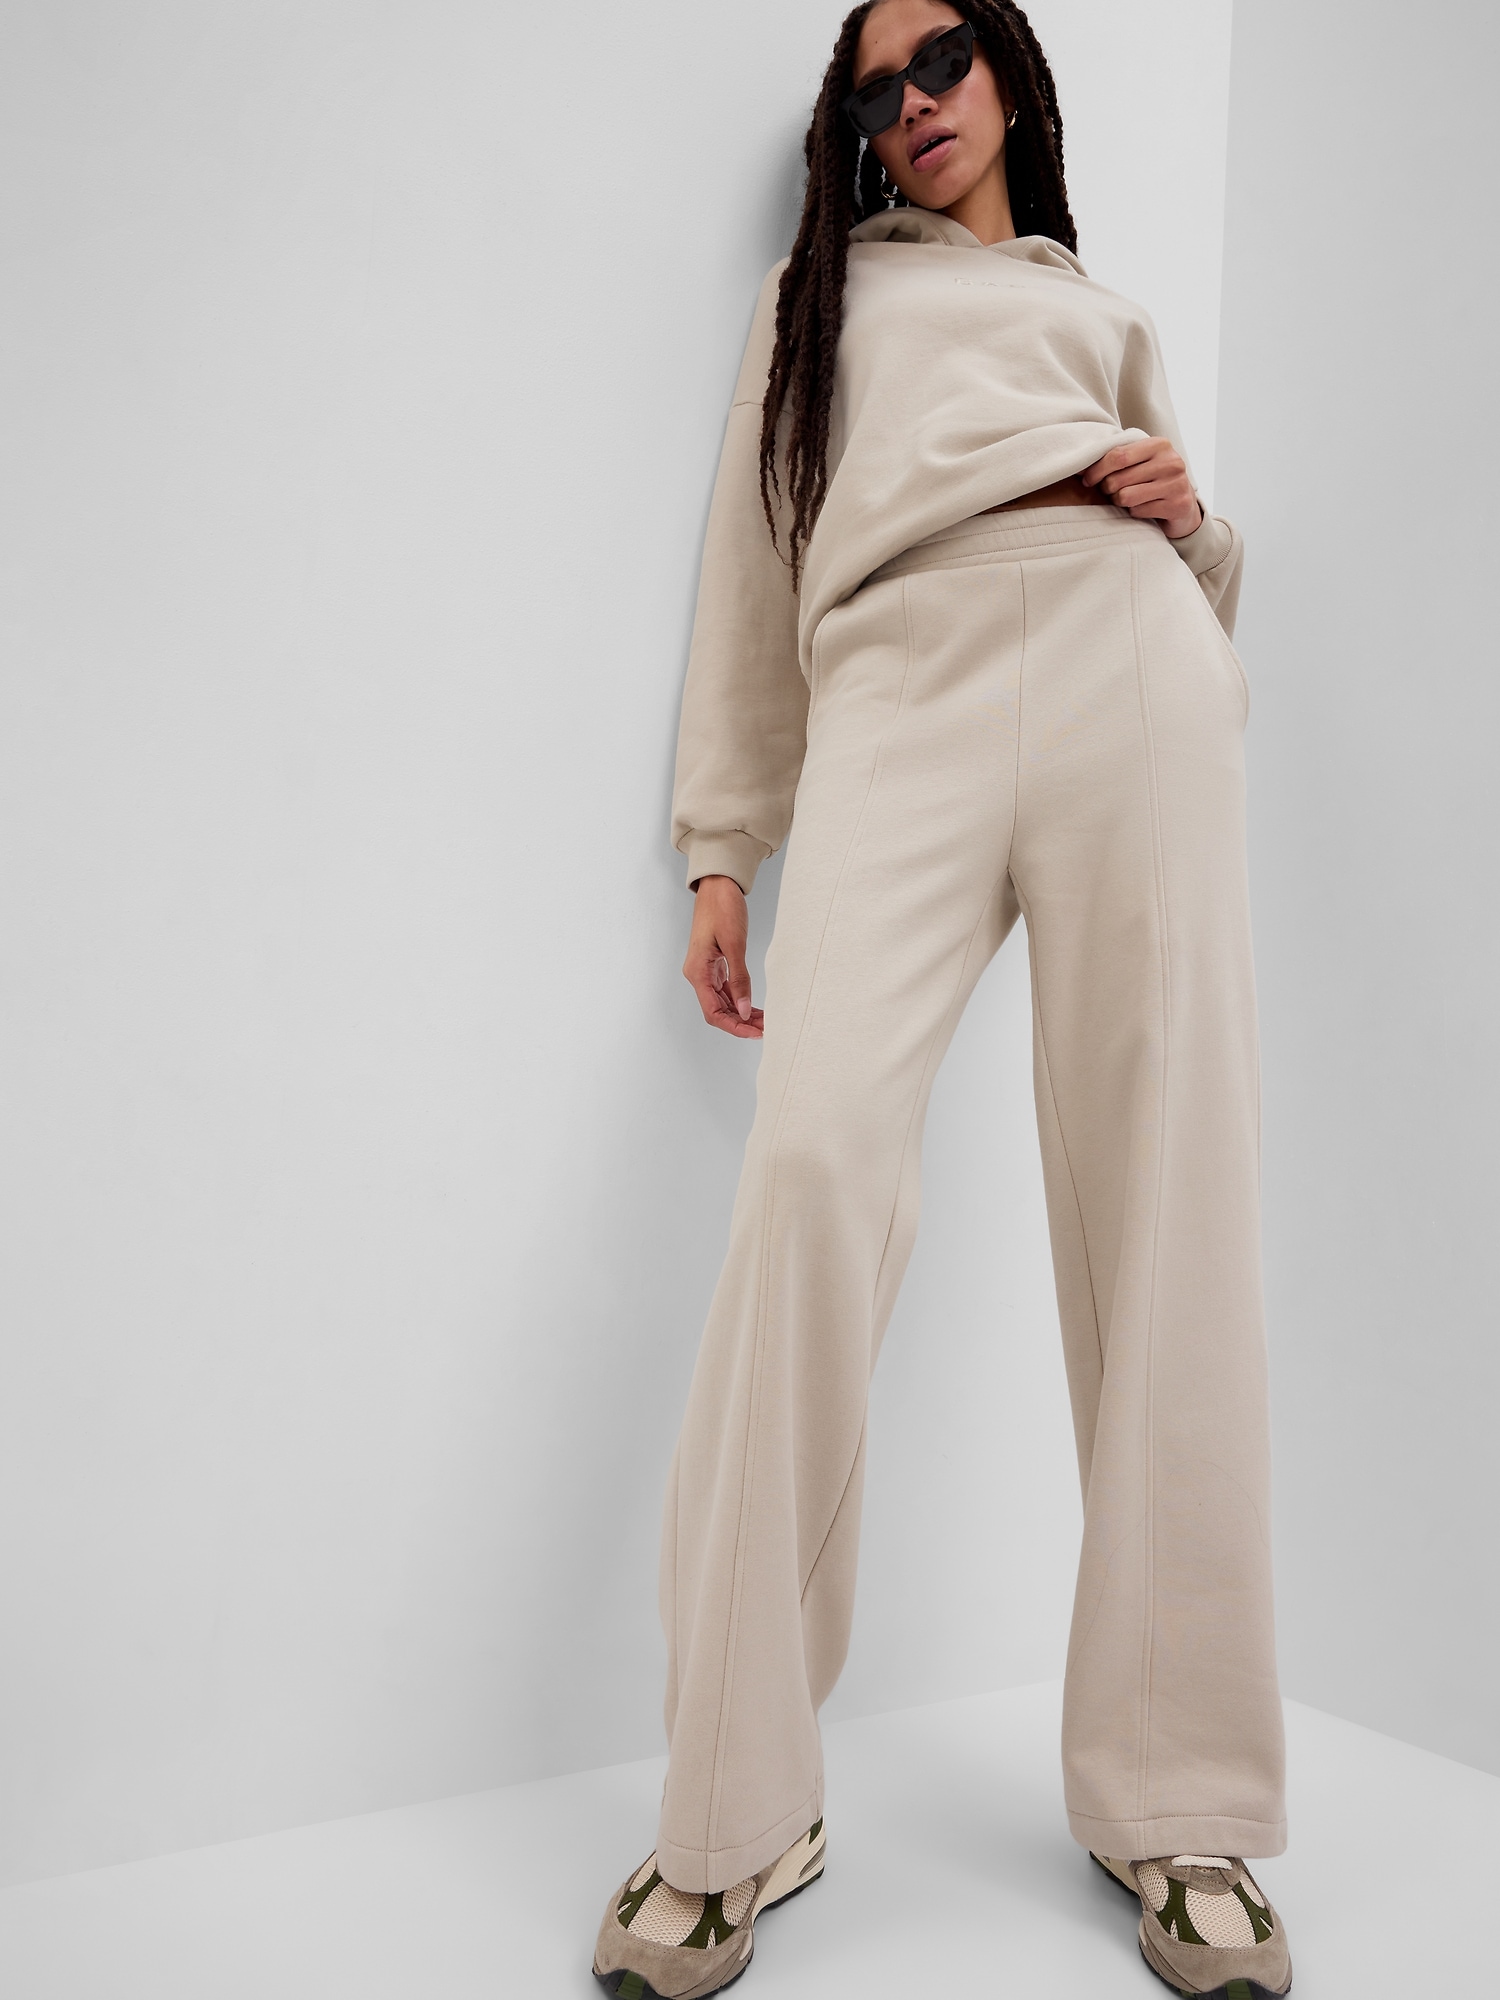 Buy Gap Airy Wide-Leg Trousers from the Gap online shop